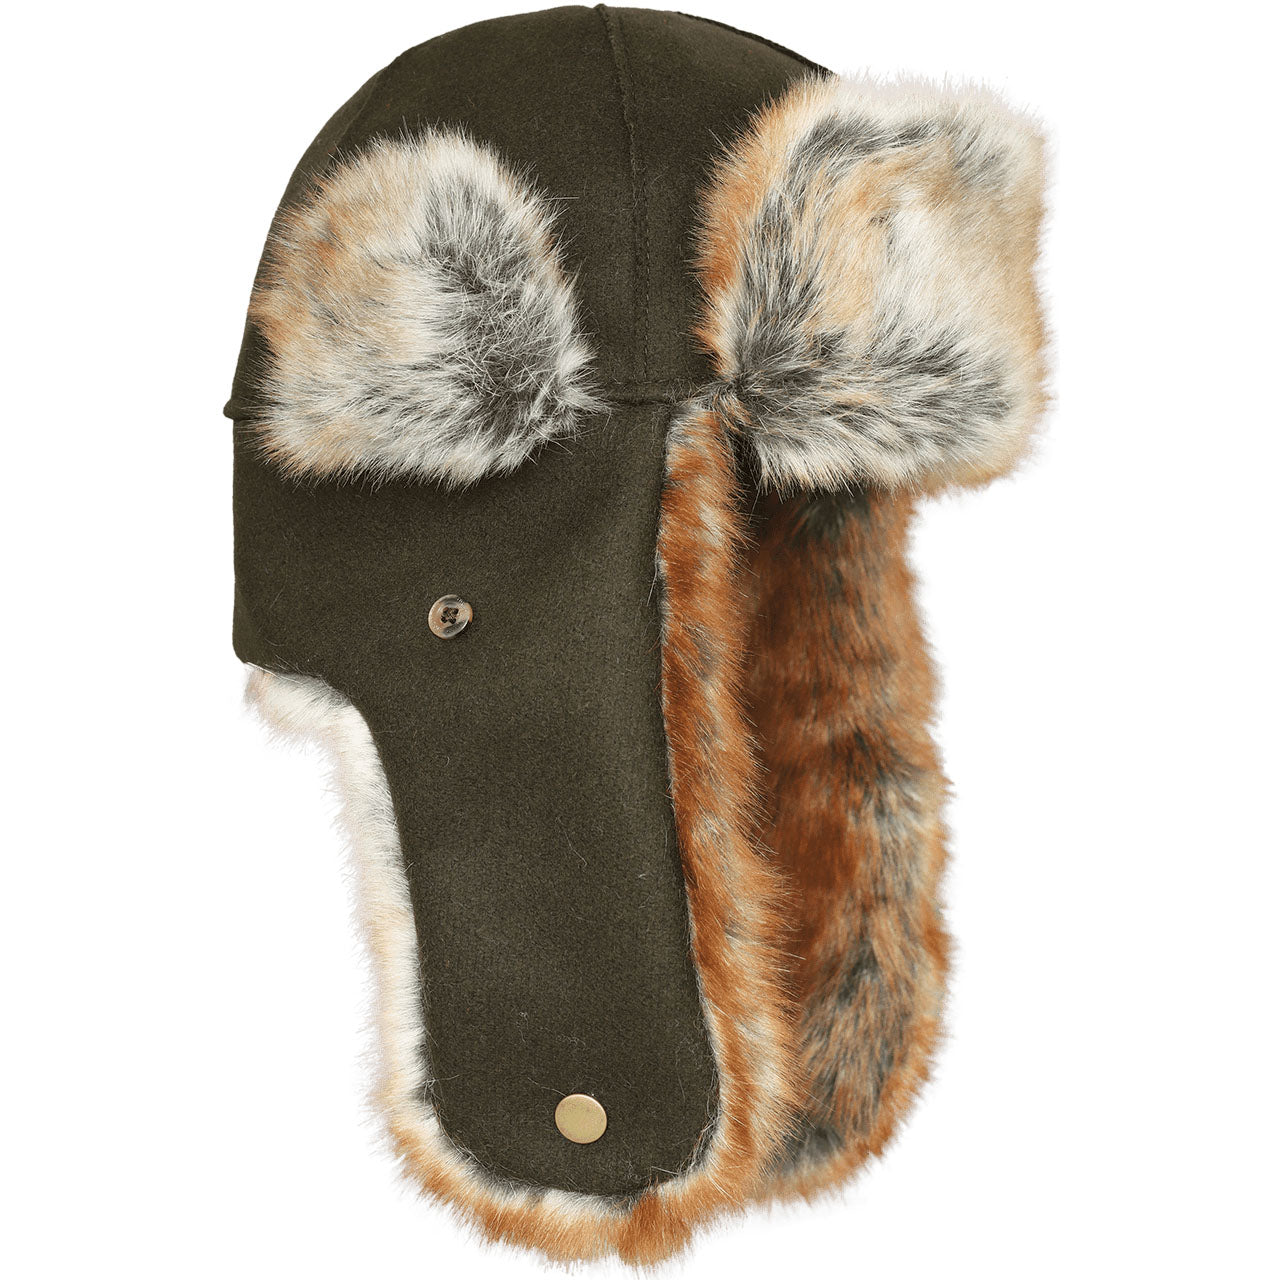 Stormy Kromer The Northwoods Trapper Hat in Olive